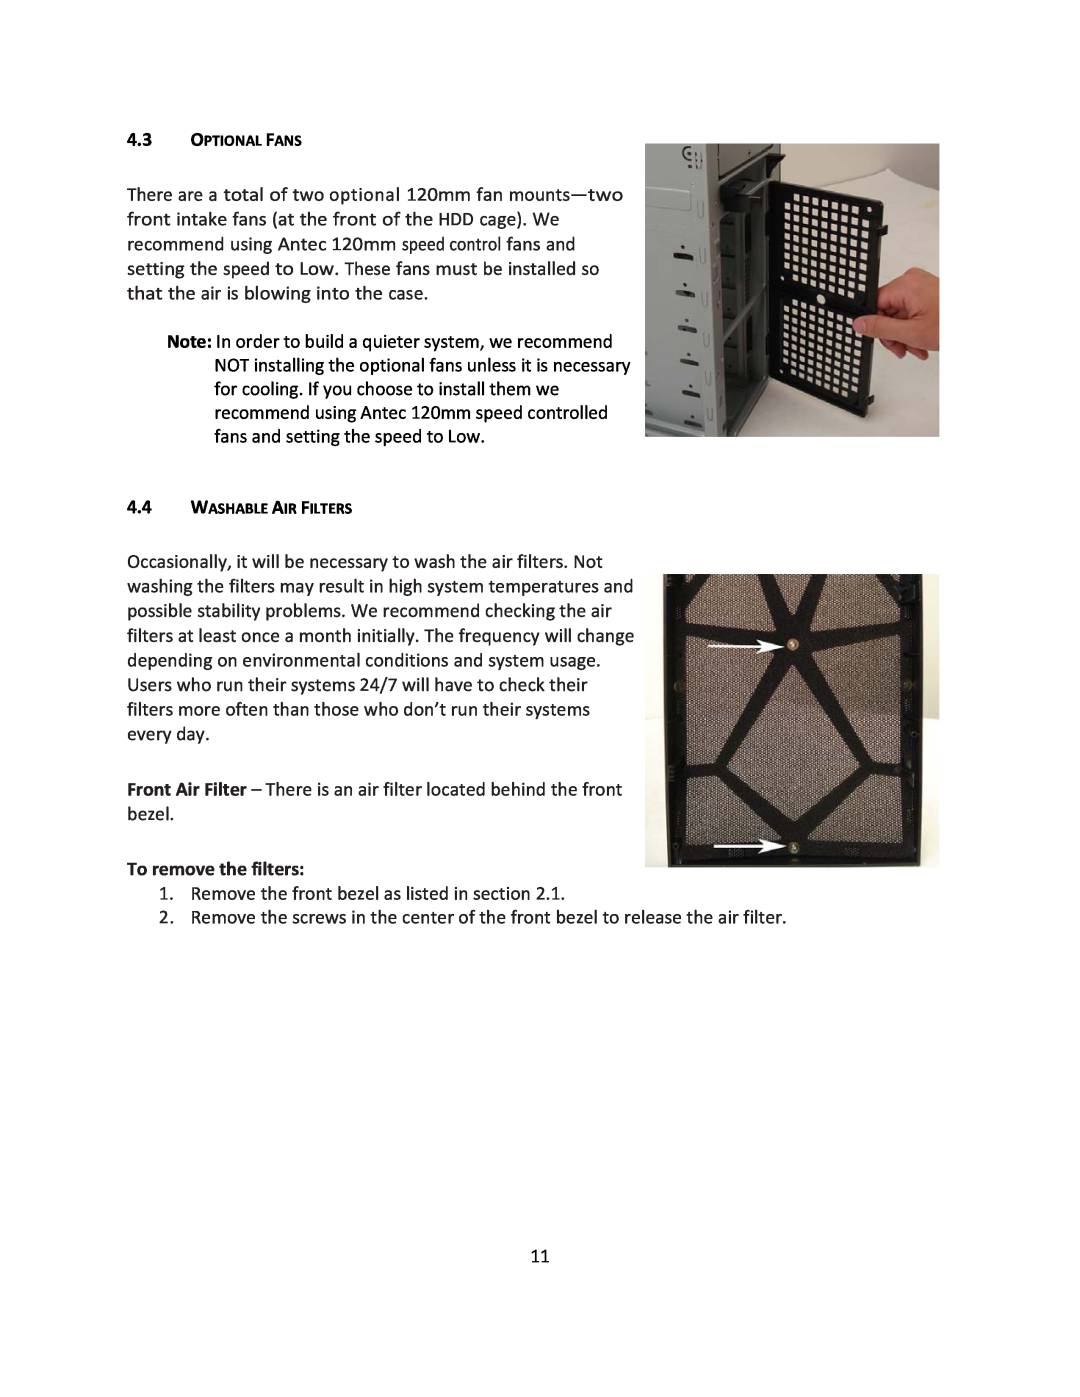 Antec VSK2450 manual To remove the filters 